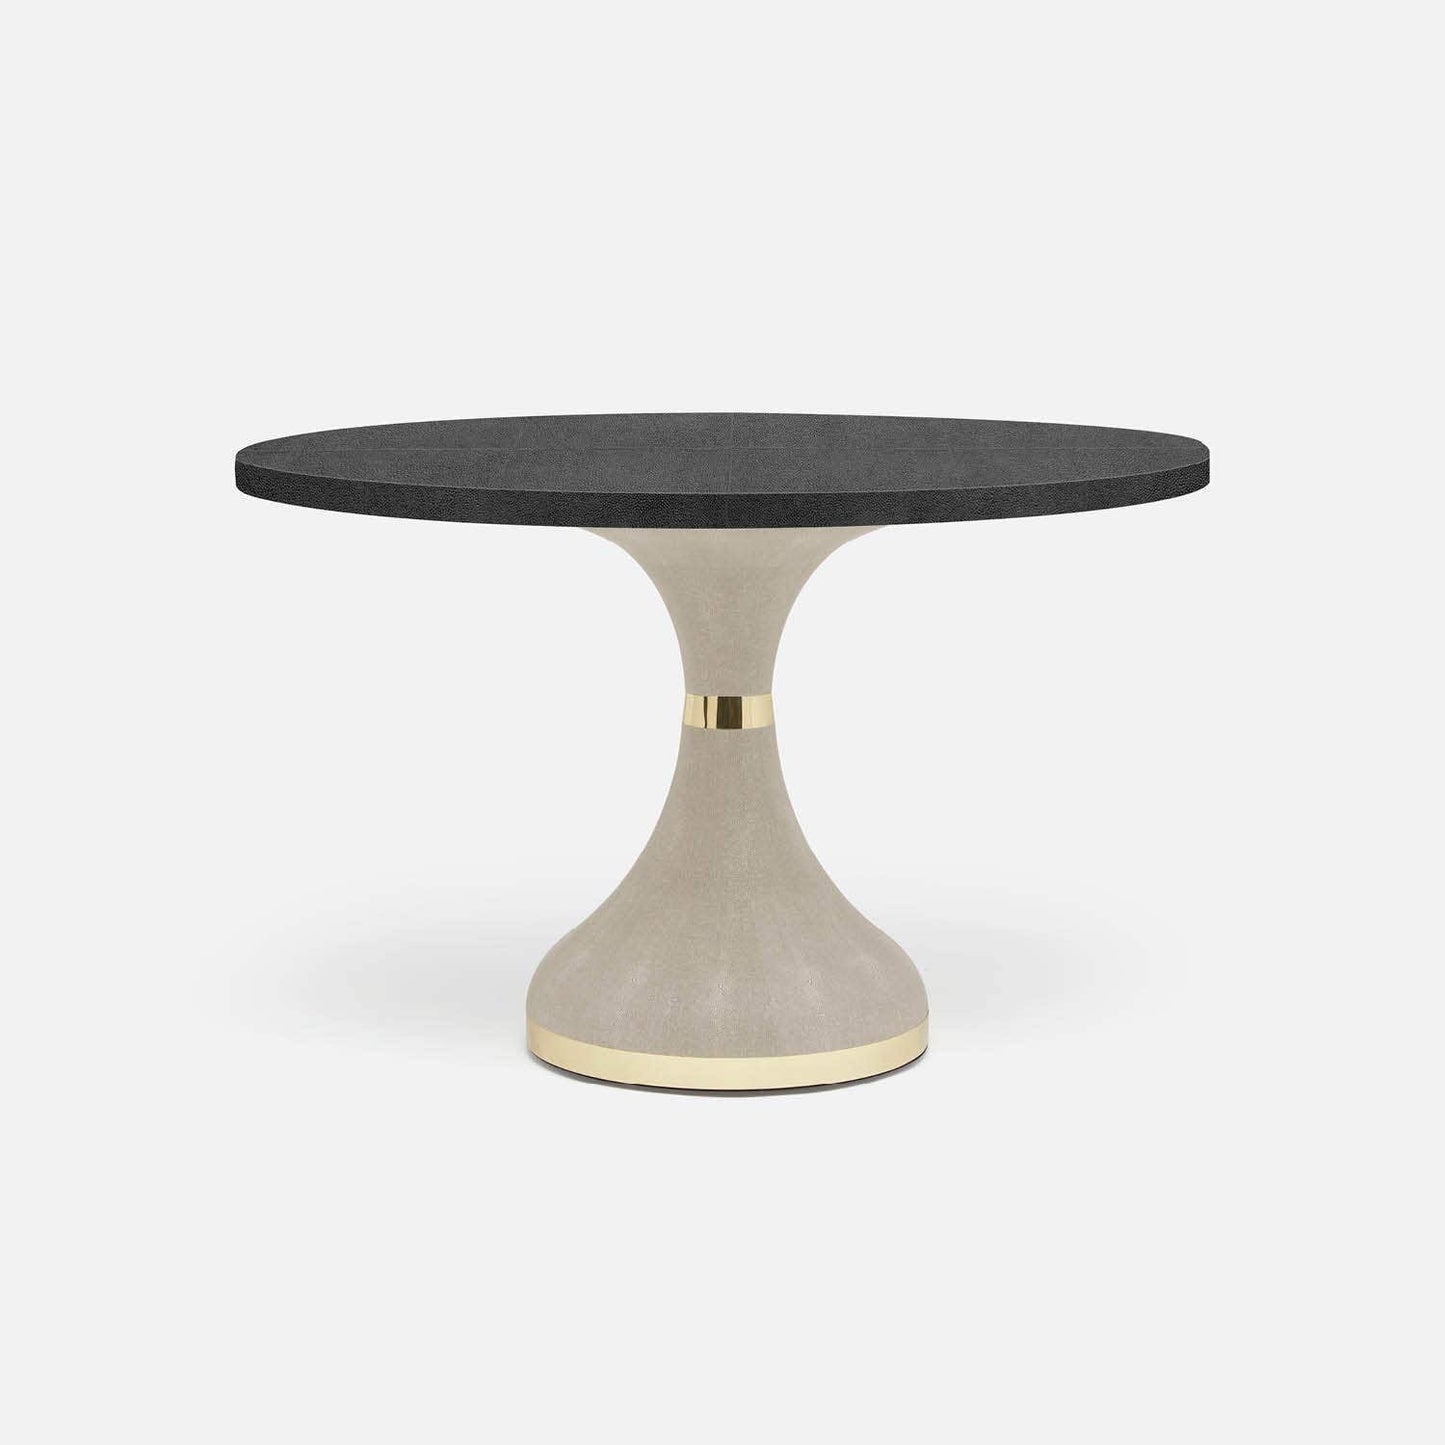 Made Goods Elis 48" x 30" Sand Realistic Faux Shagreen Dinning Table With Round Black Vintage Faux Shagreen Table Top